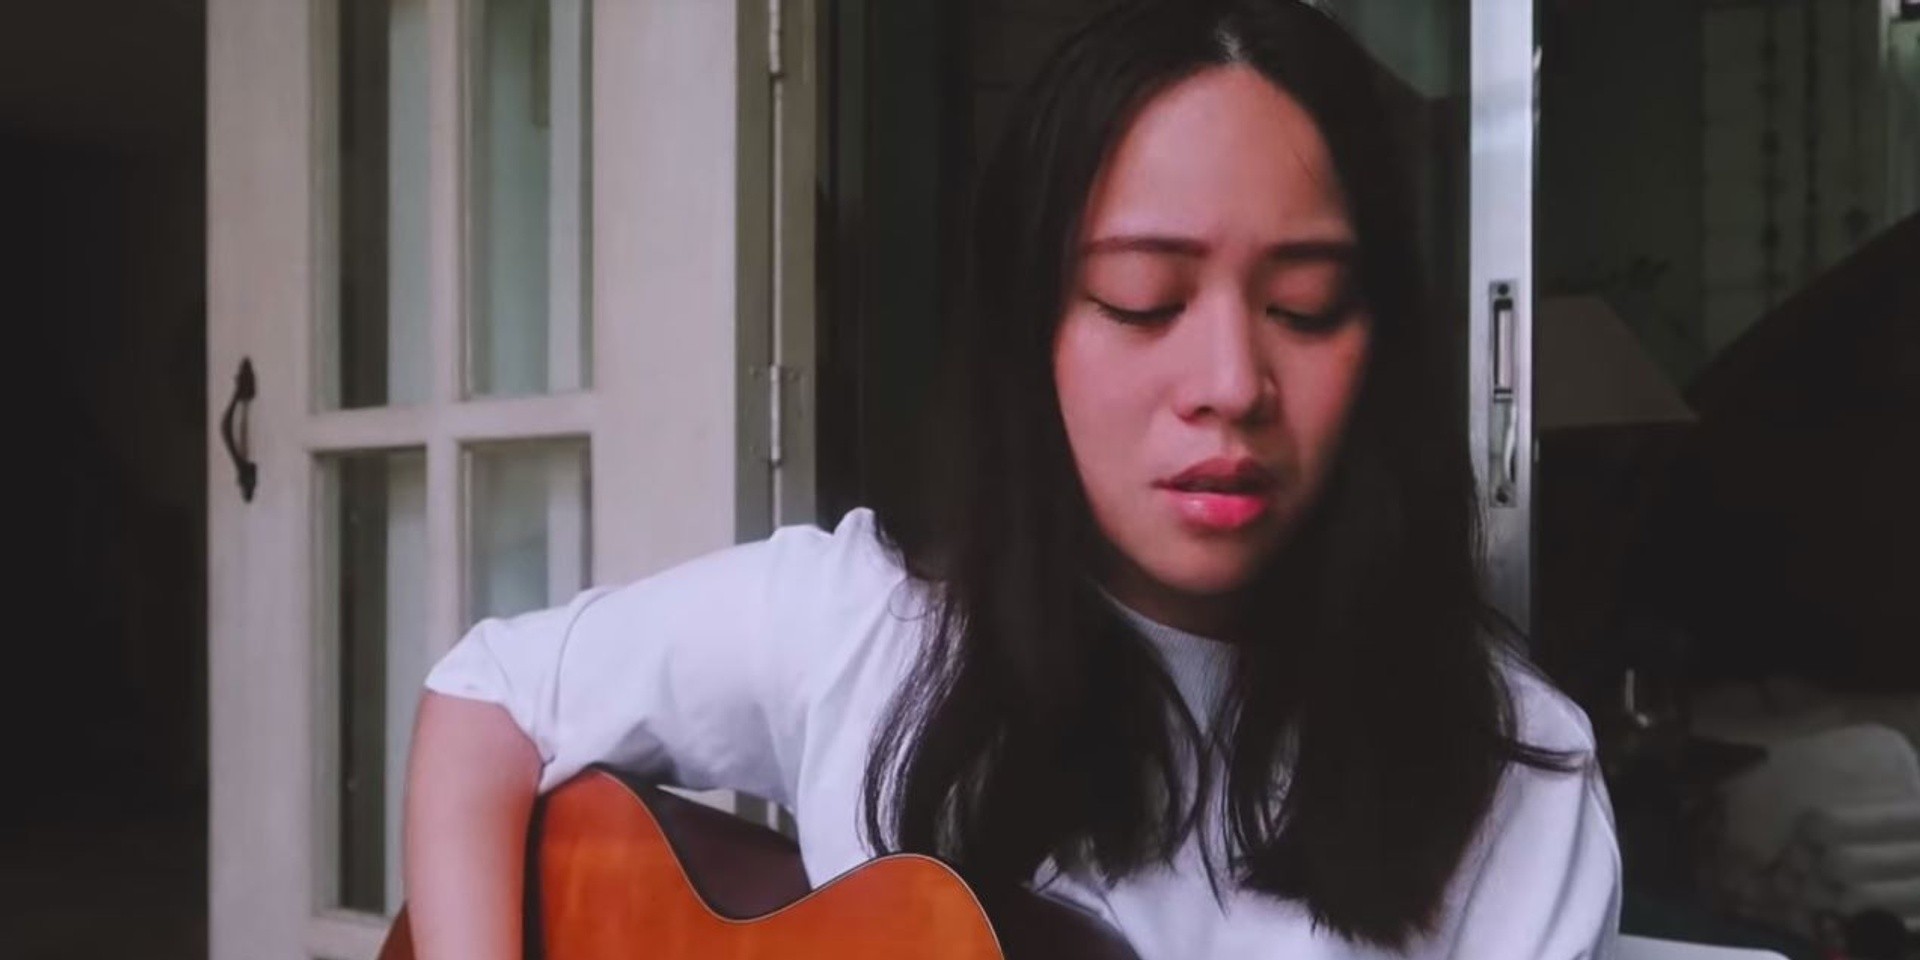 Reese Lansangan goes K-Pop with acoustic cover of Red Velvet's 'Bad Boy' – watch